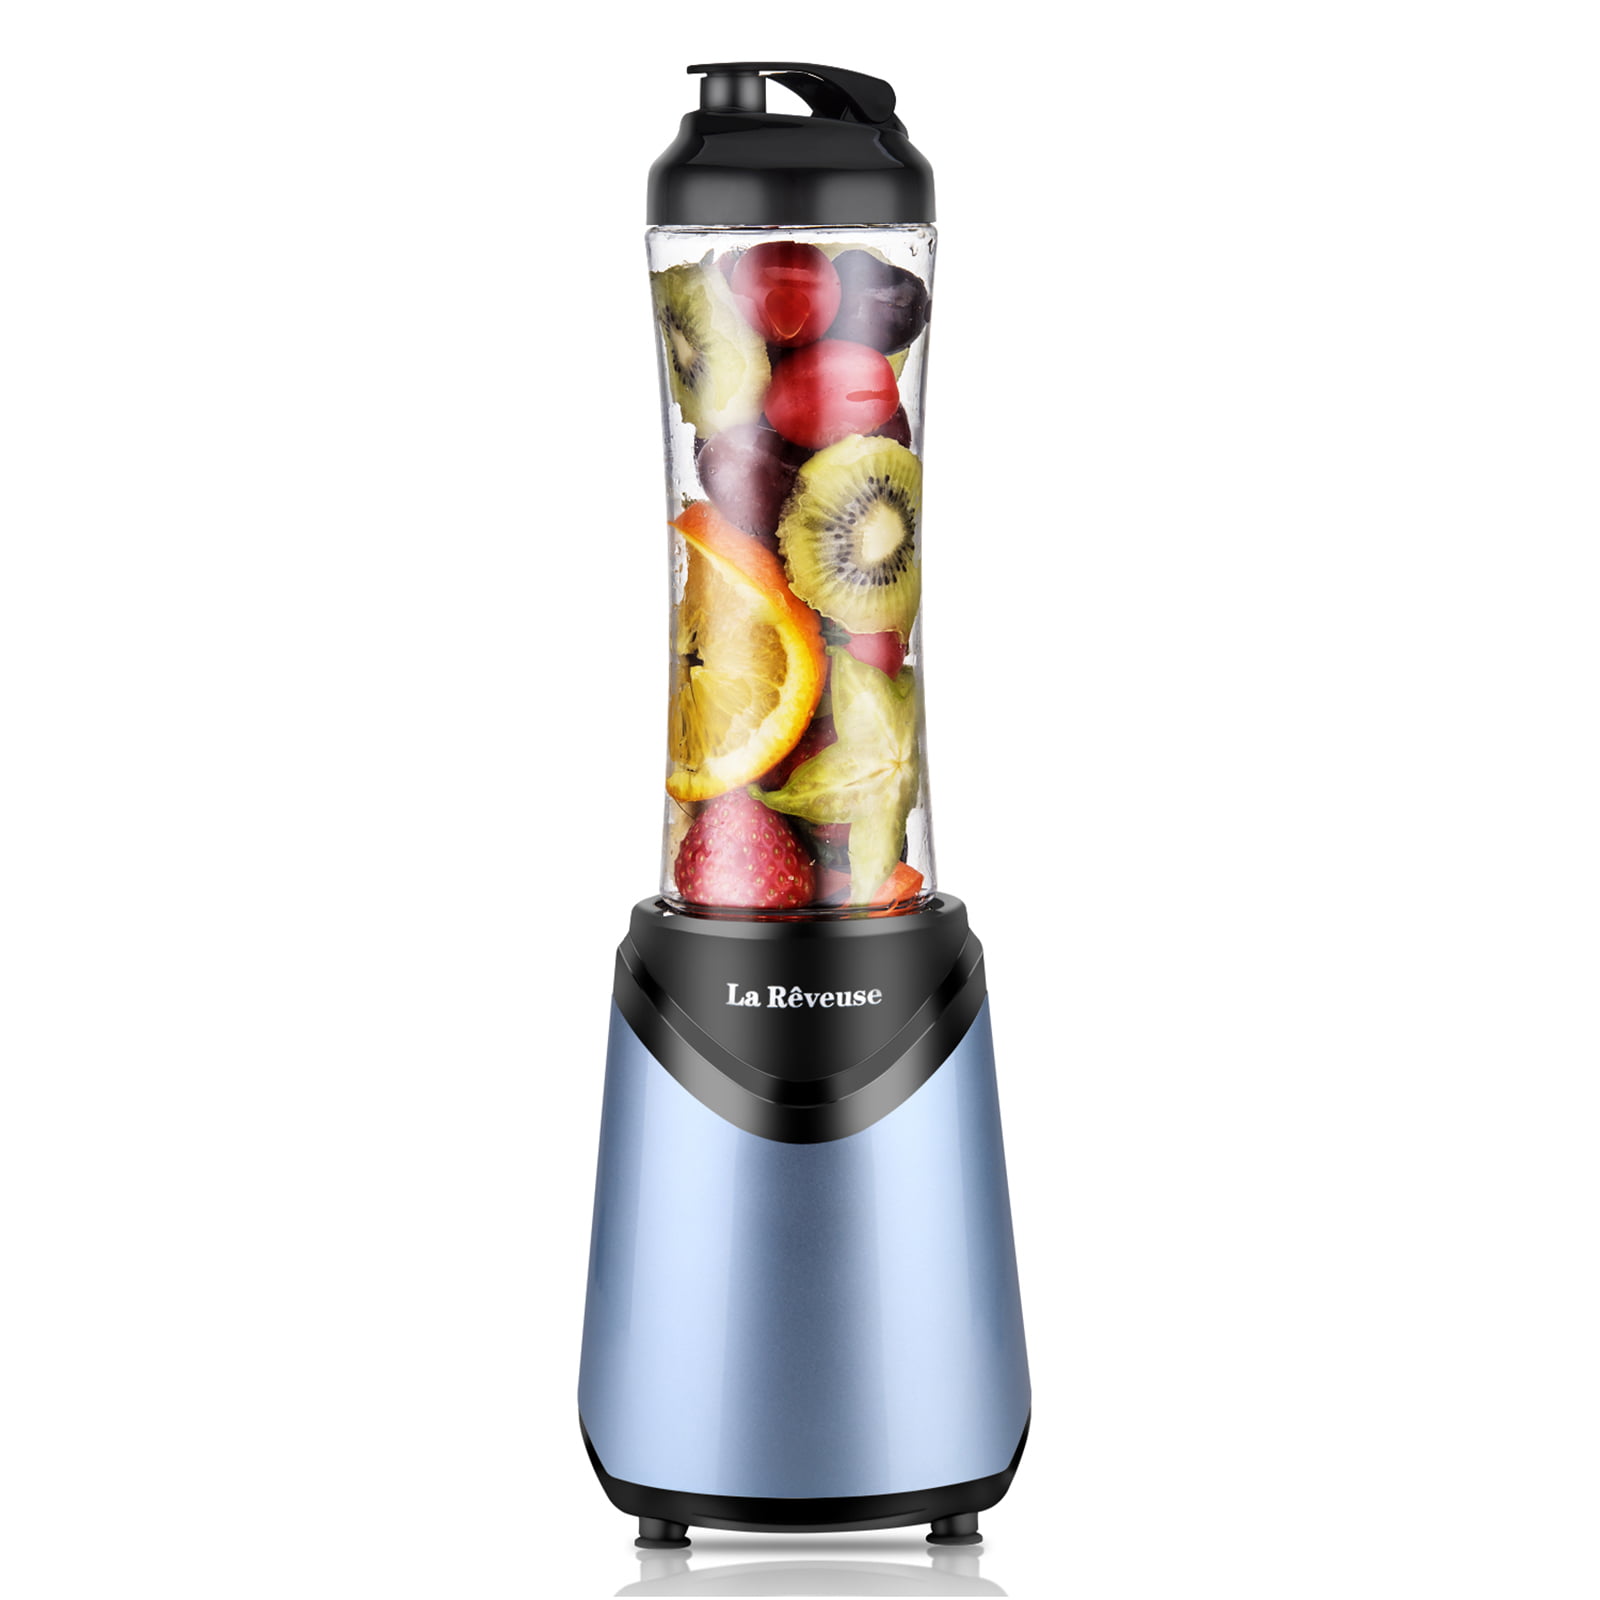 Thaivee Portable Blender: Blend Healthy Smoothies On-the-Go